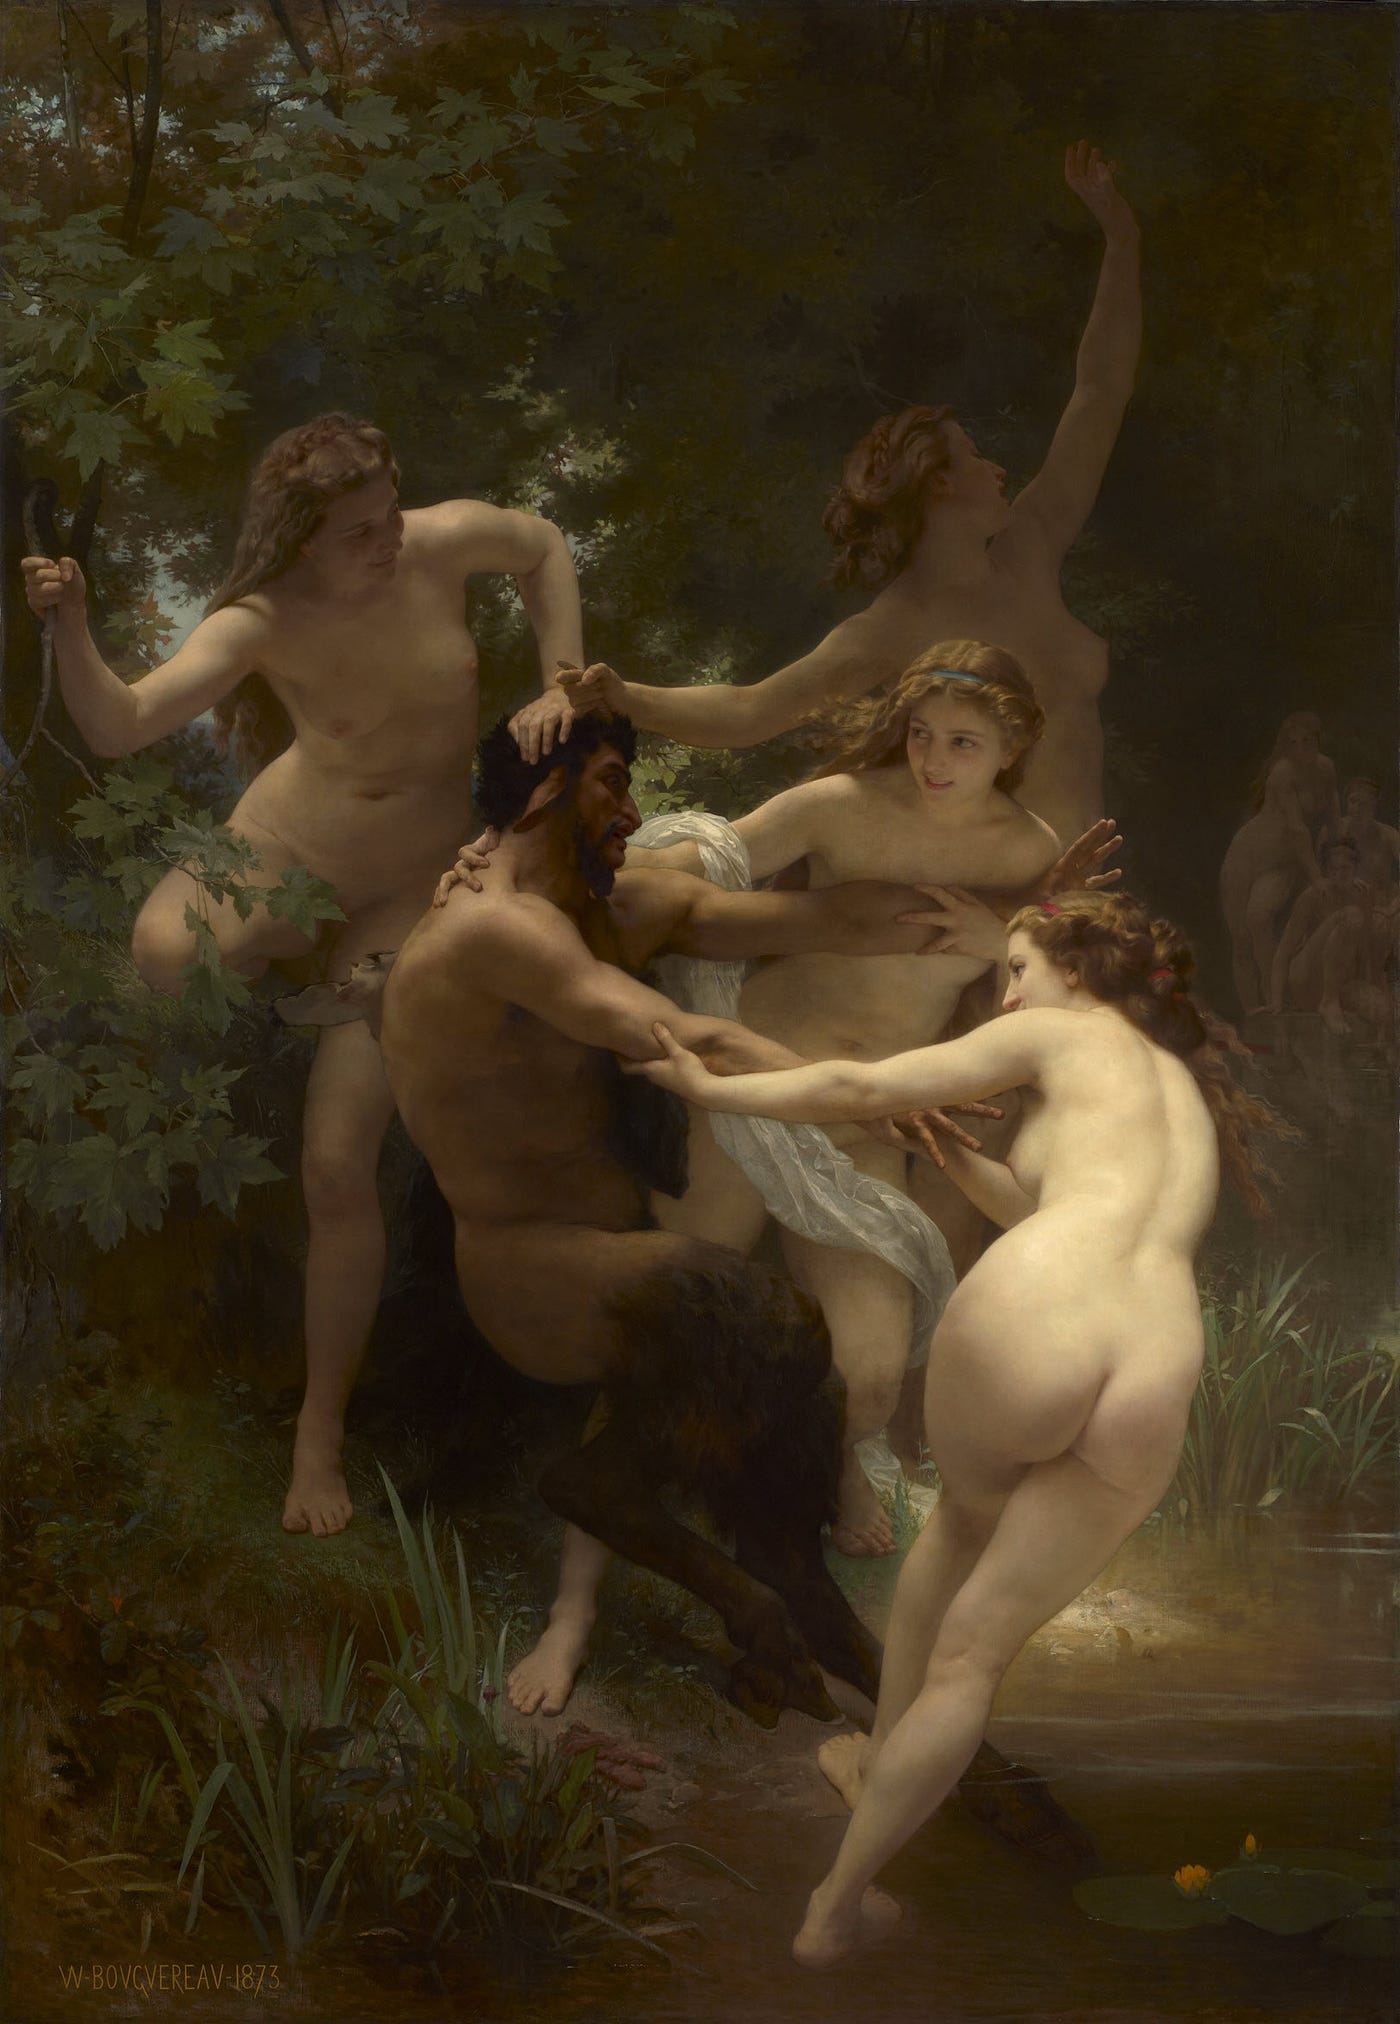 The Nymphs and Satyrs of William-Adolphe Bouguereau by Remy Dean Signifier Medium